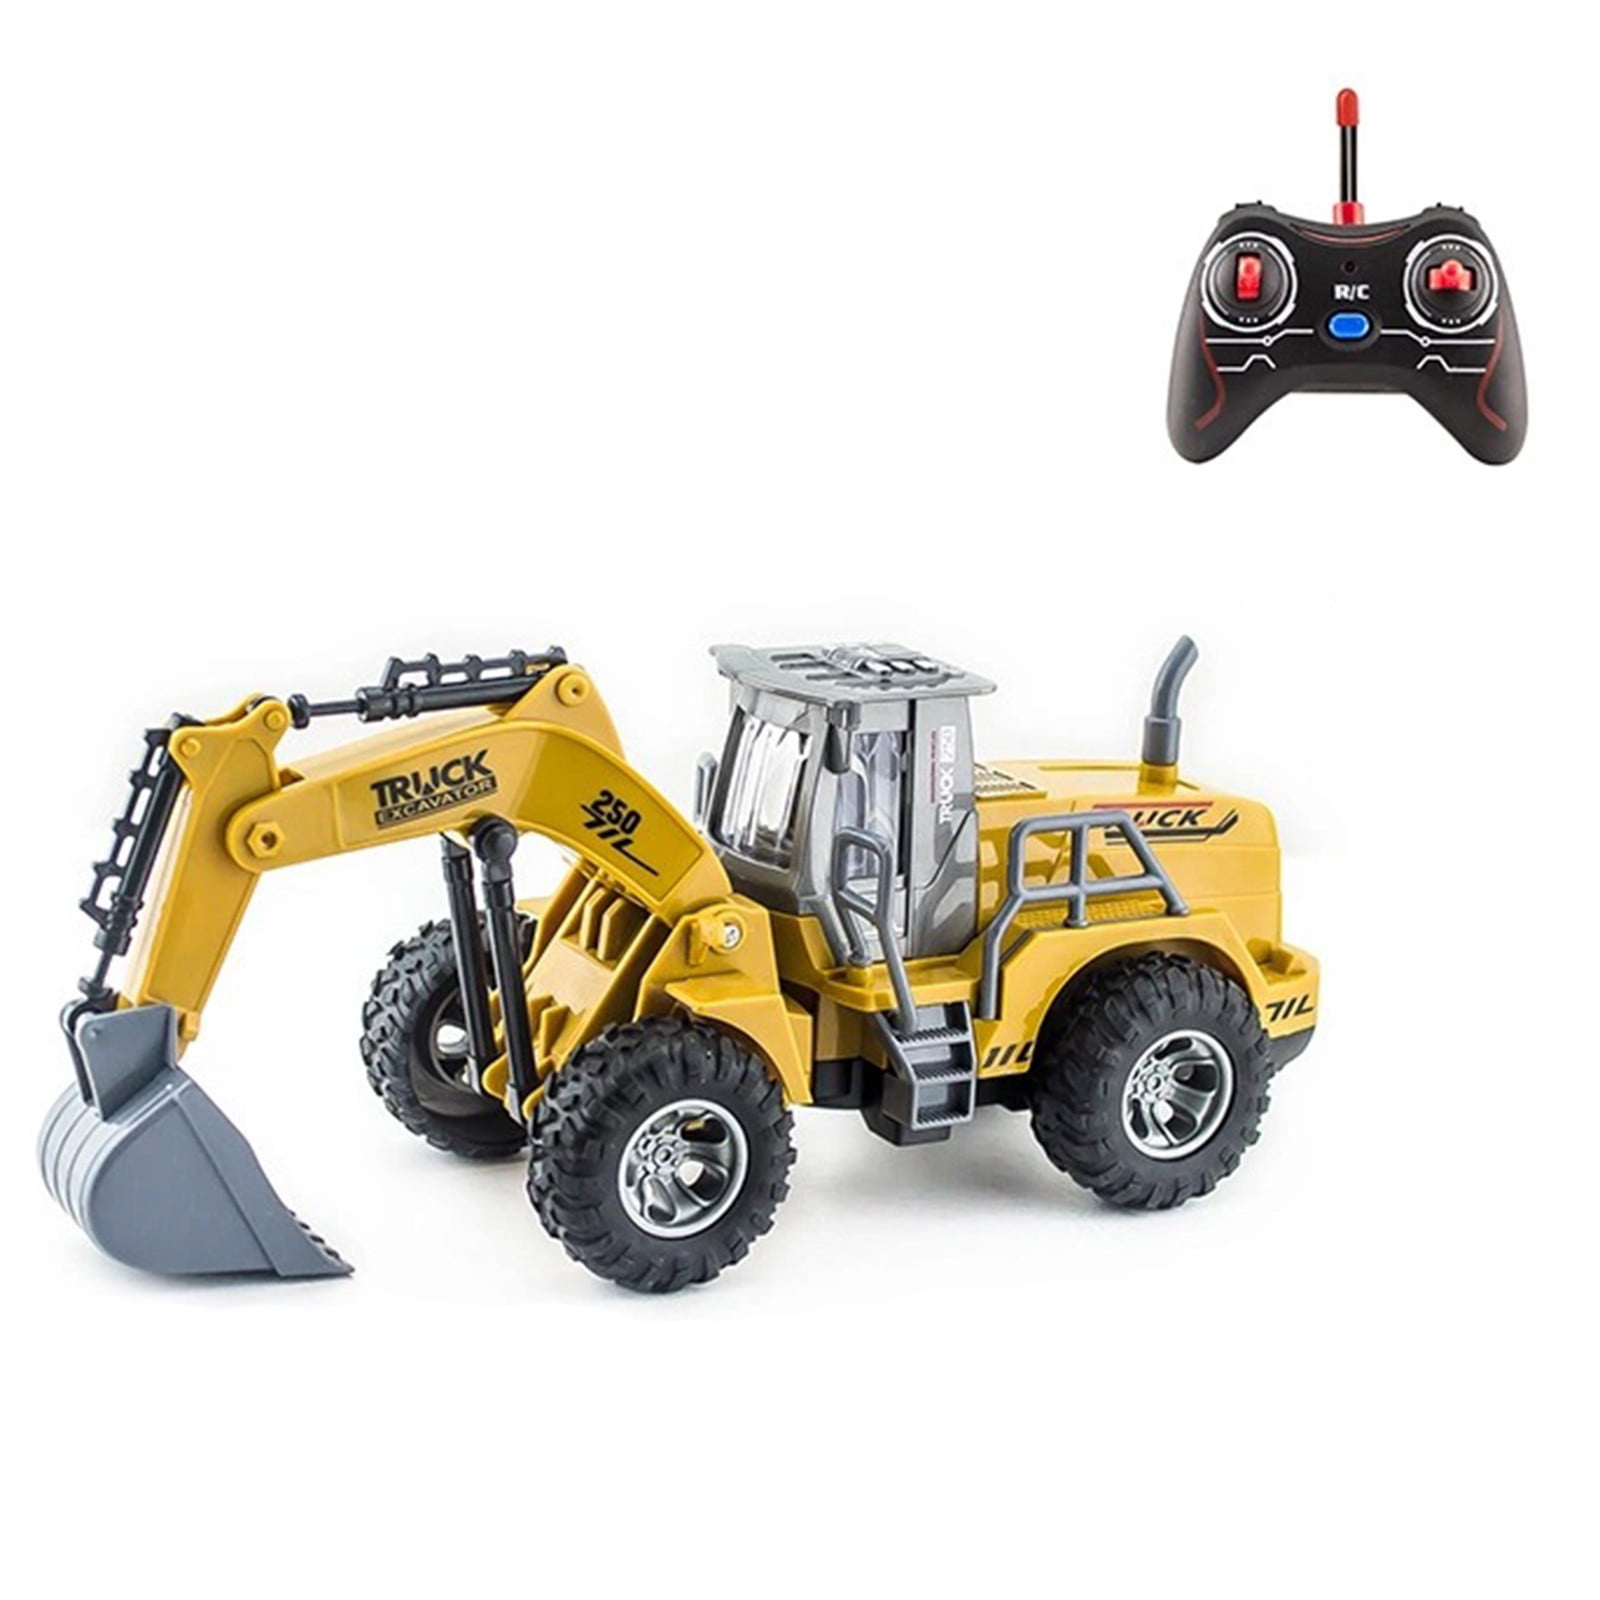 Kids Tower Remote Control RC Crane Construction Engineering Vehicle Toy Playset 